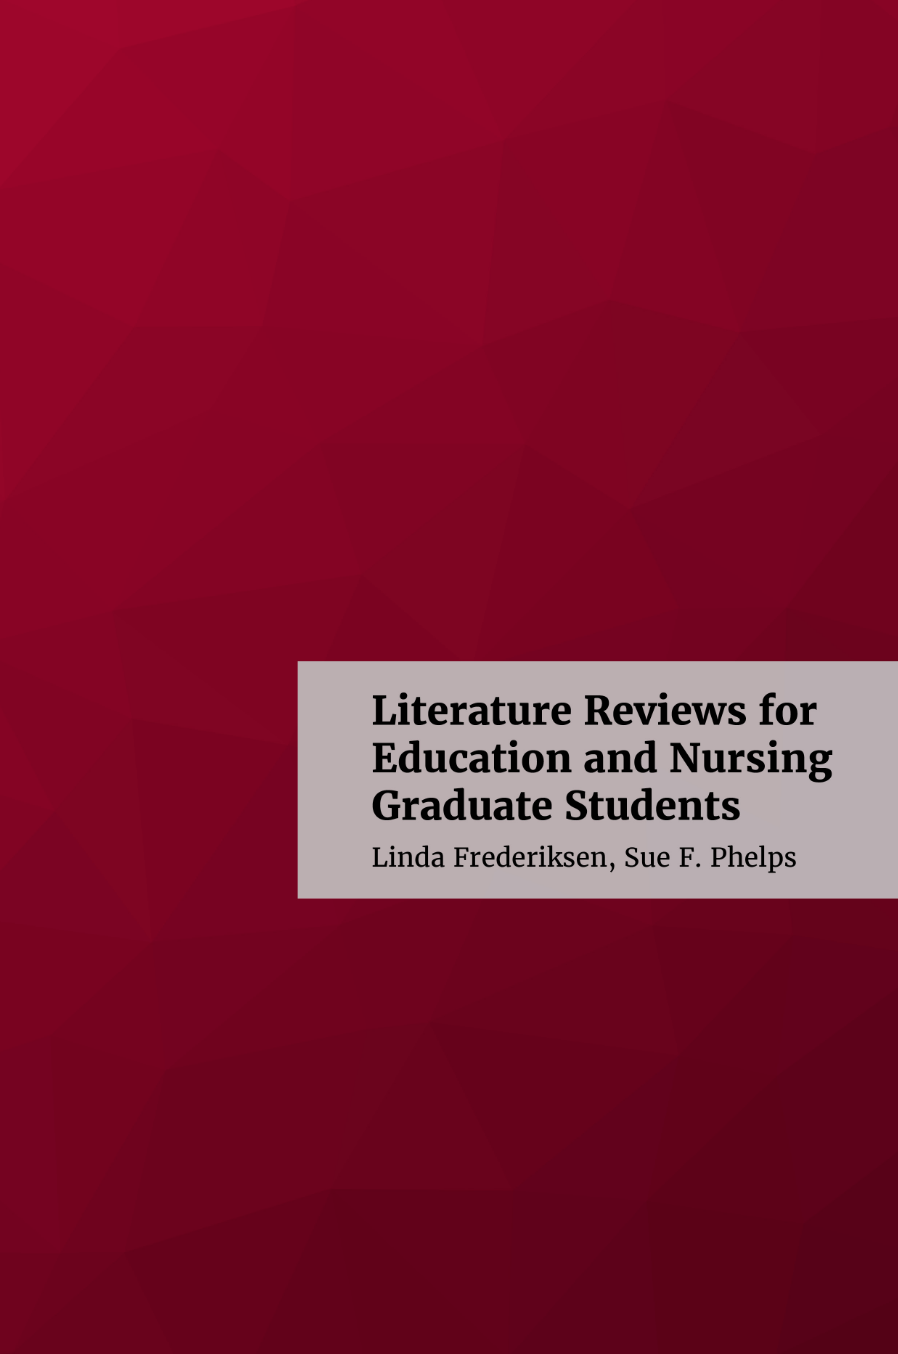 literature review an overview for graduate students